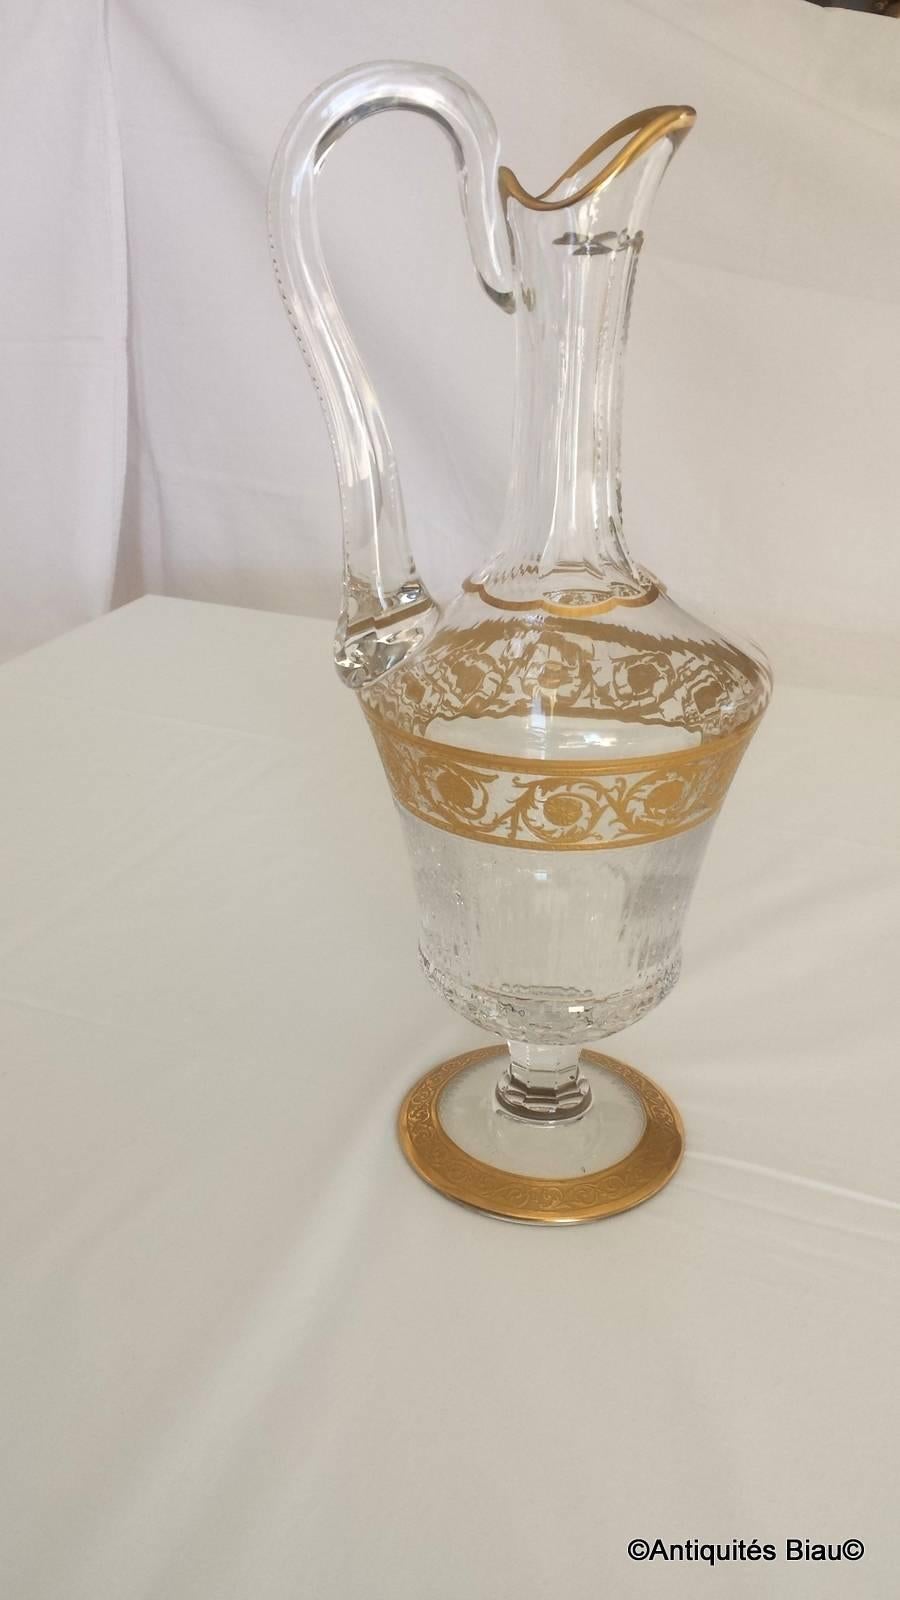 18 glasses with decanter model gold thistle six water glasses (height 180 mm), six burgundy glasses (height 162 mm), Six Bordeaux glass (height 142 mm), height decanter: 34 cm in perfect condition crystal and golden The thistle was the original